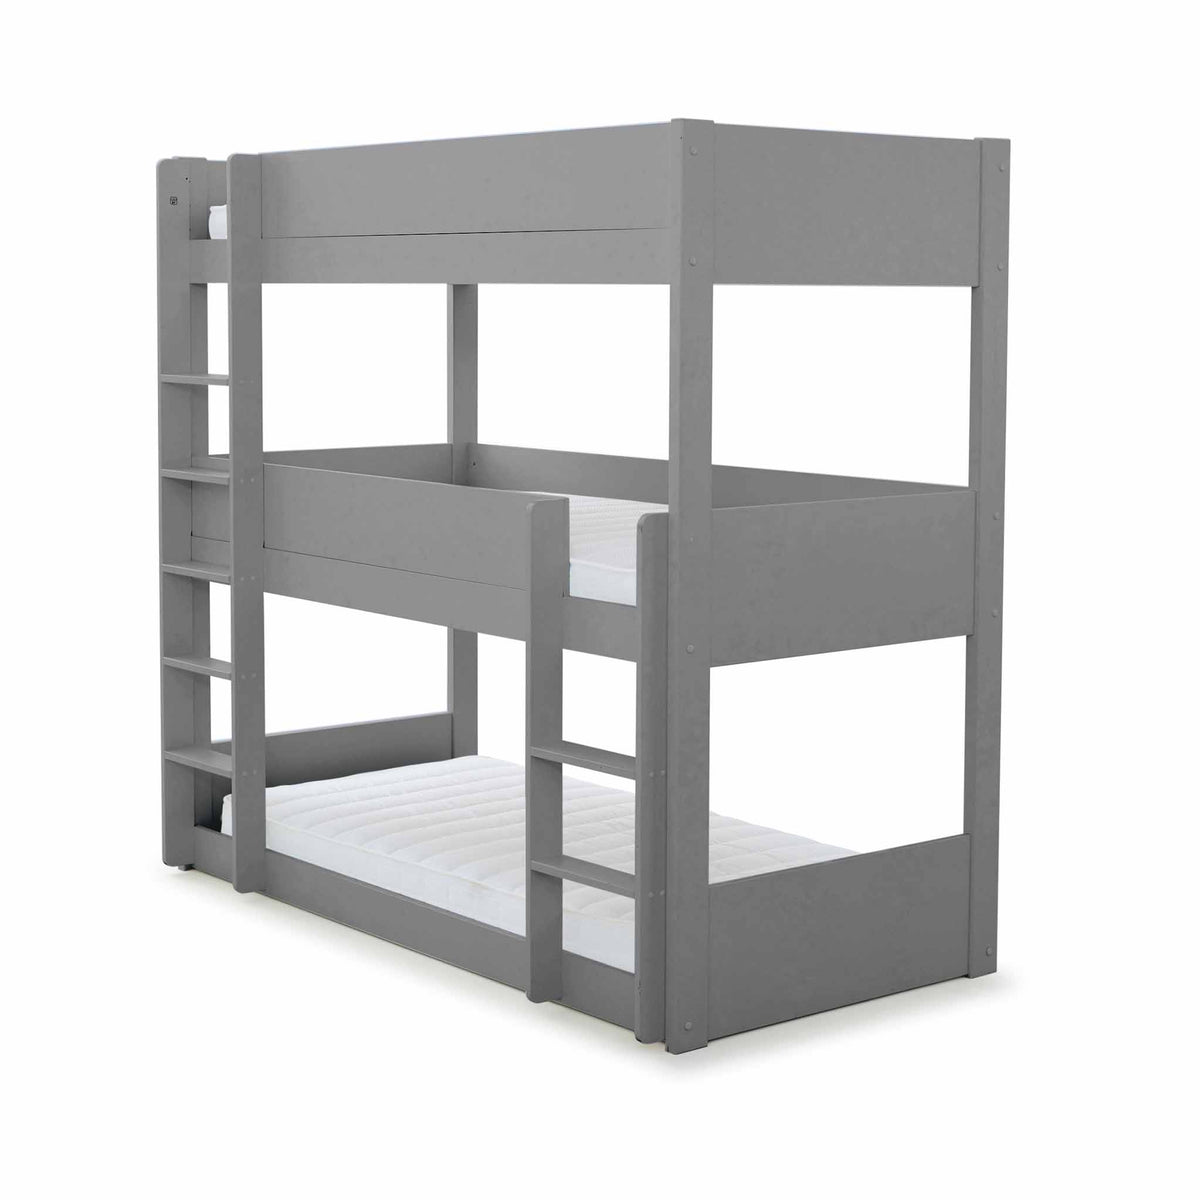 Trio Grey 3 Sleeper Wooden Bunk Bed from Roseland Furniture